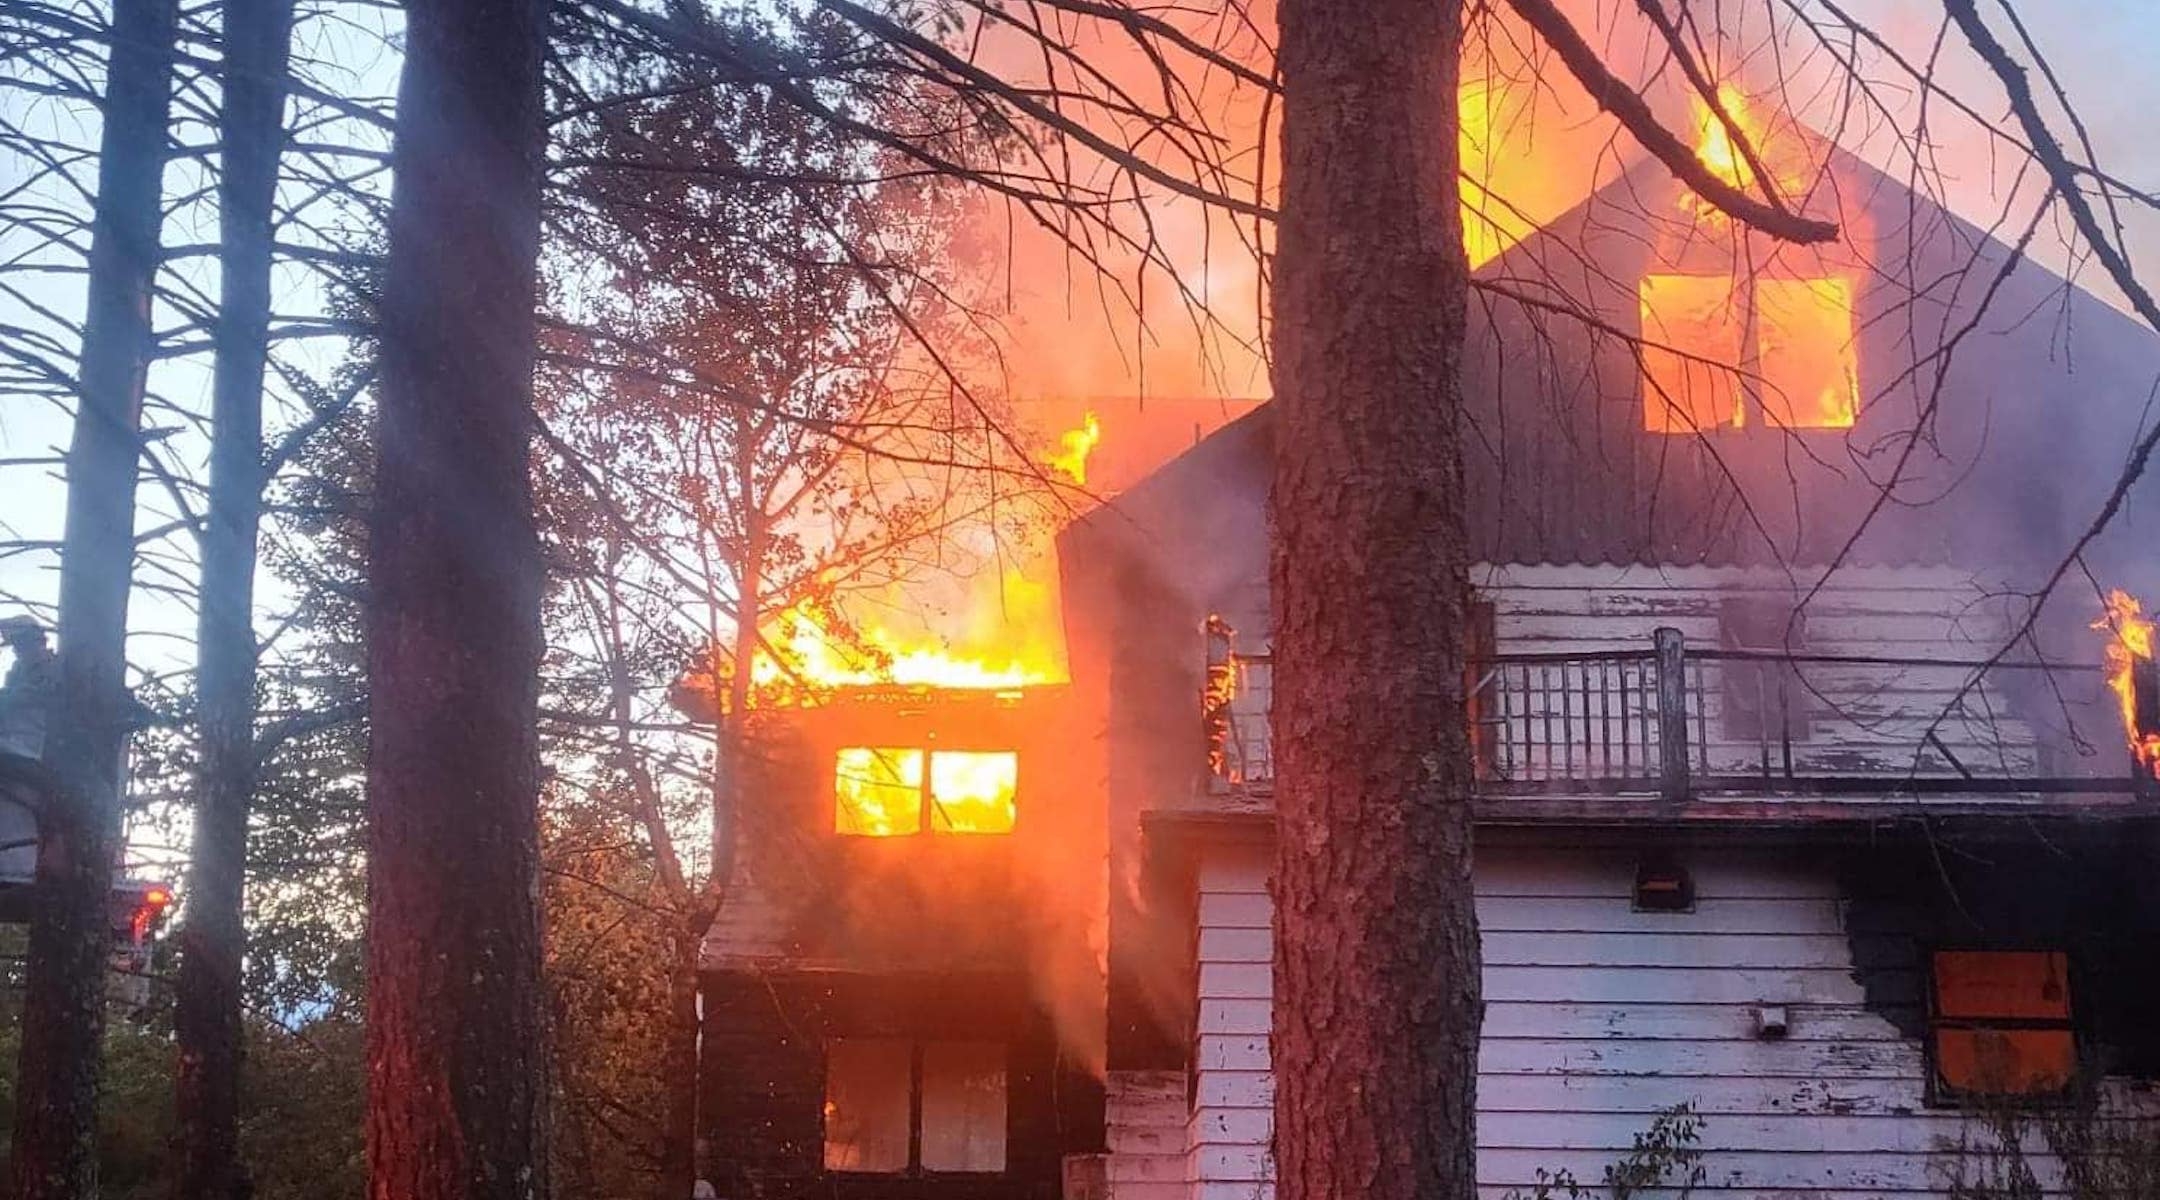 Fire destroys building at Grossinger’s Catskills resort, the inspiration for ‘Dirty Dancing’